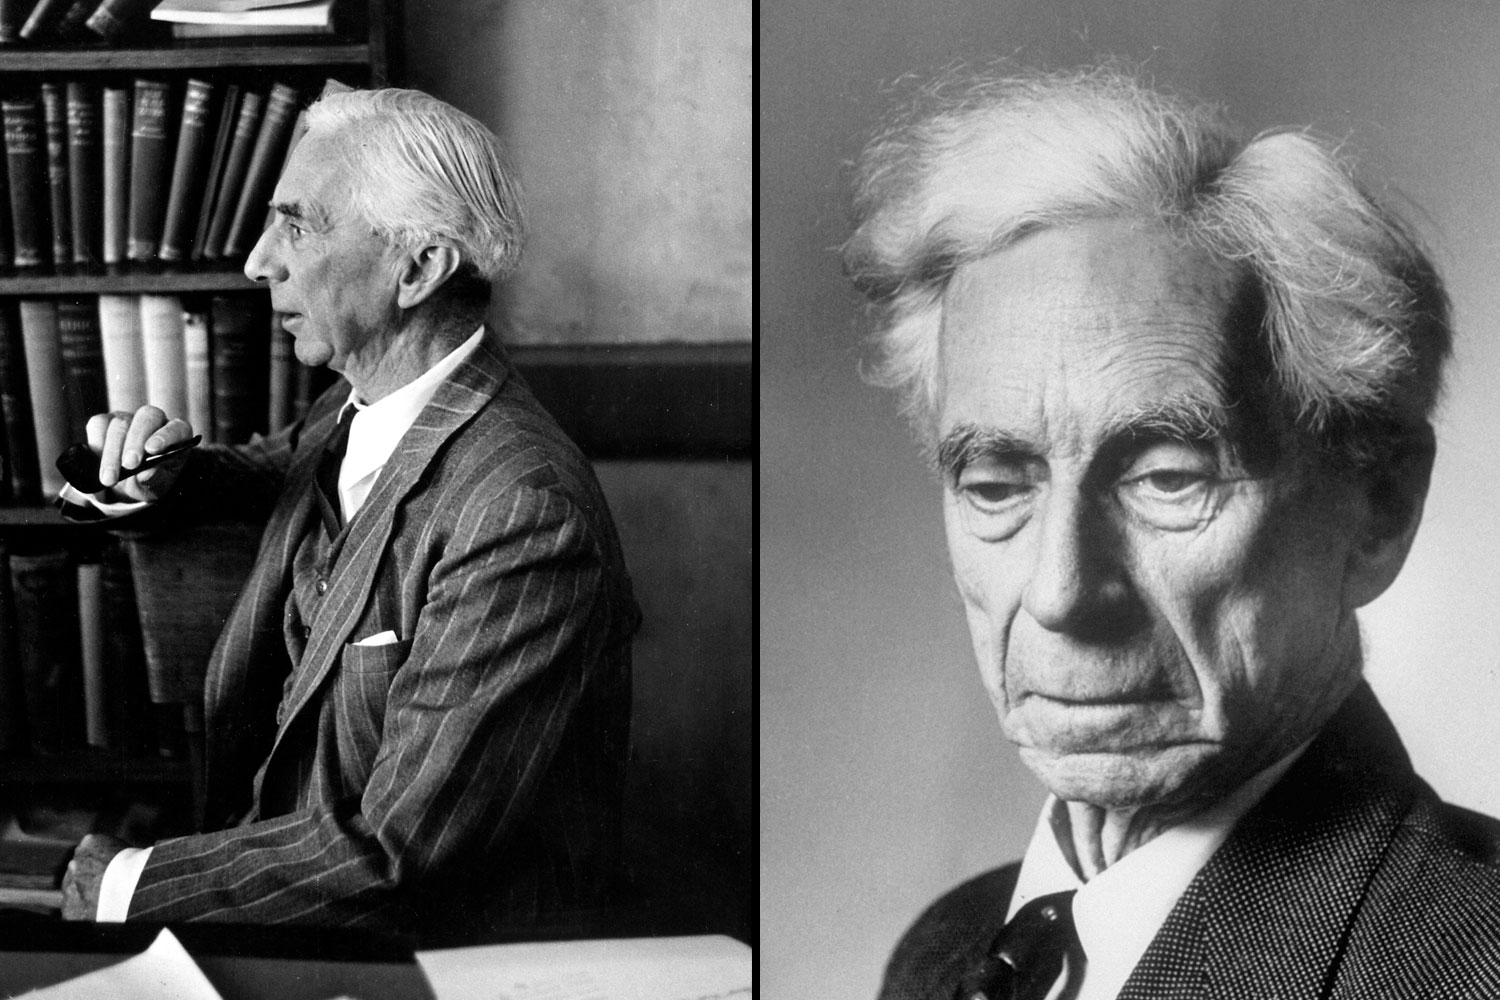 Philosopher Bertrand Russell at his desk at UCLA in 1940 (left), and in England in 1951 (right). He was awarded the Nobel Prize in Literature in 1950.